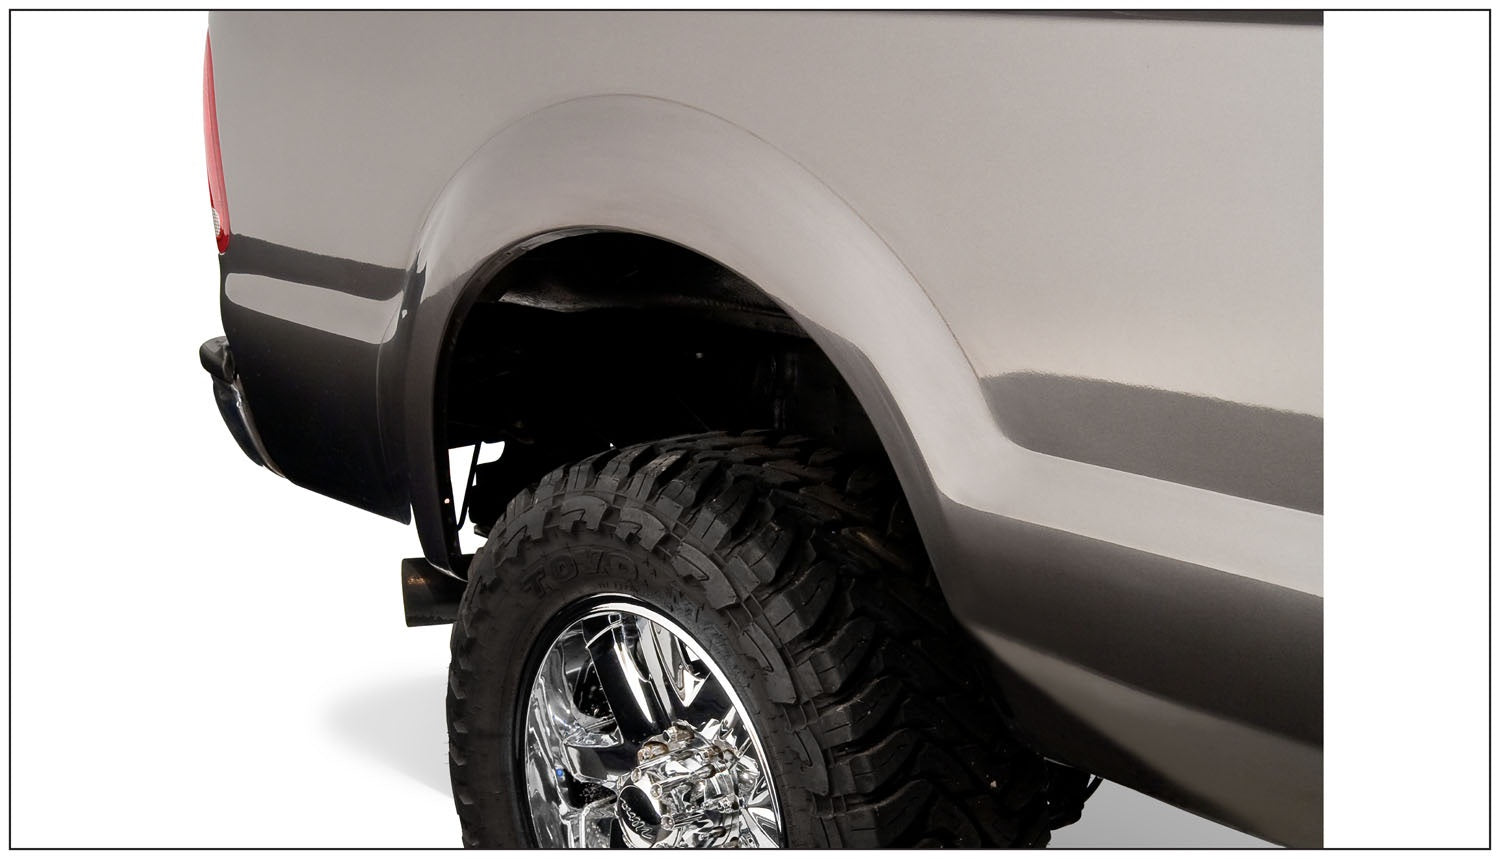 Bushwacker 20040-02 Black OE-Style Smooth Finish Rear Fender Flares for 1999-2010 Ford F-250 Super Duty, F-350 Super Duty (Excludes Dually)